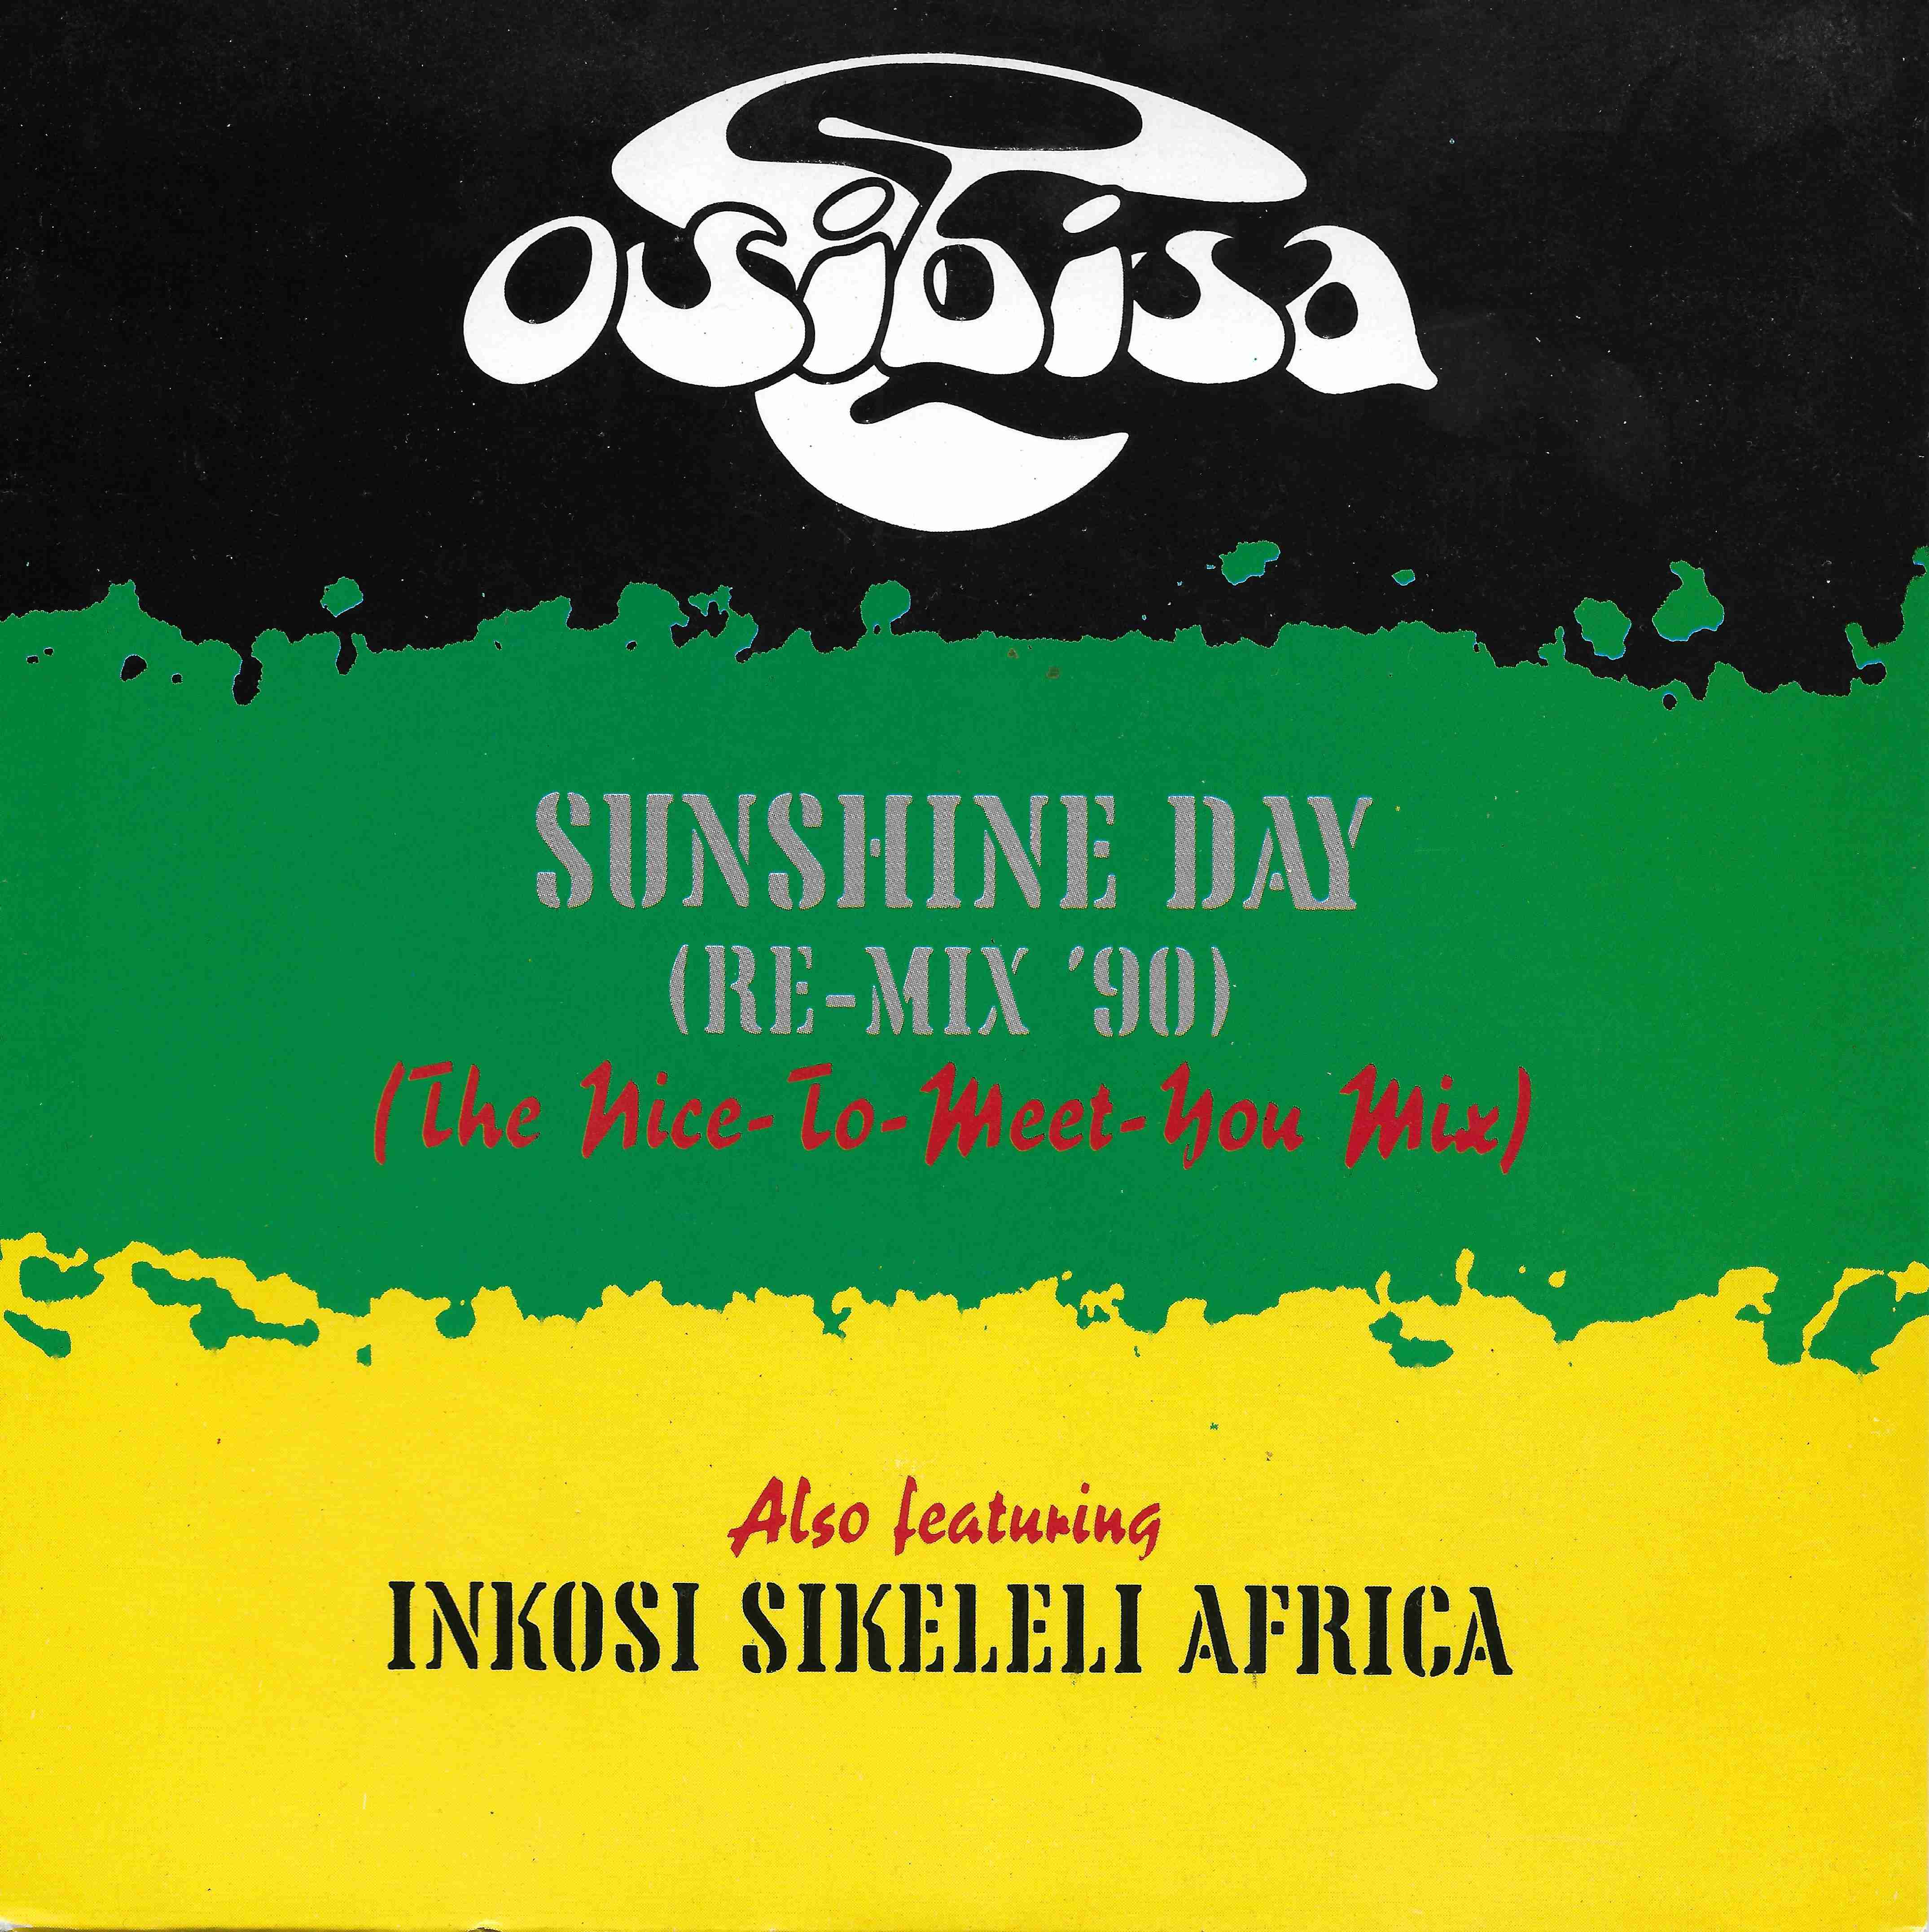 Picture of RESL 246 Sunshine day (Nice to meet you mix) by artist Osel / Tontoh / Amarfio / Osibisa from the BBC records and Tapes library